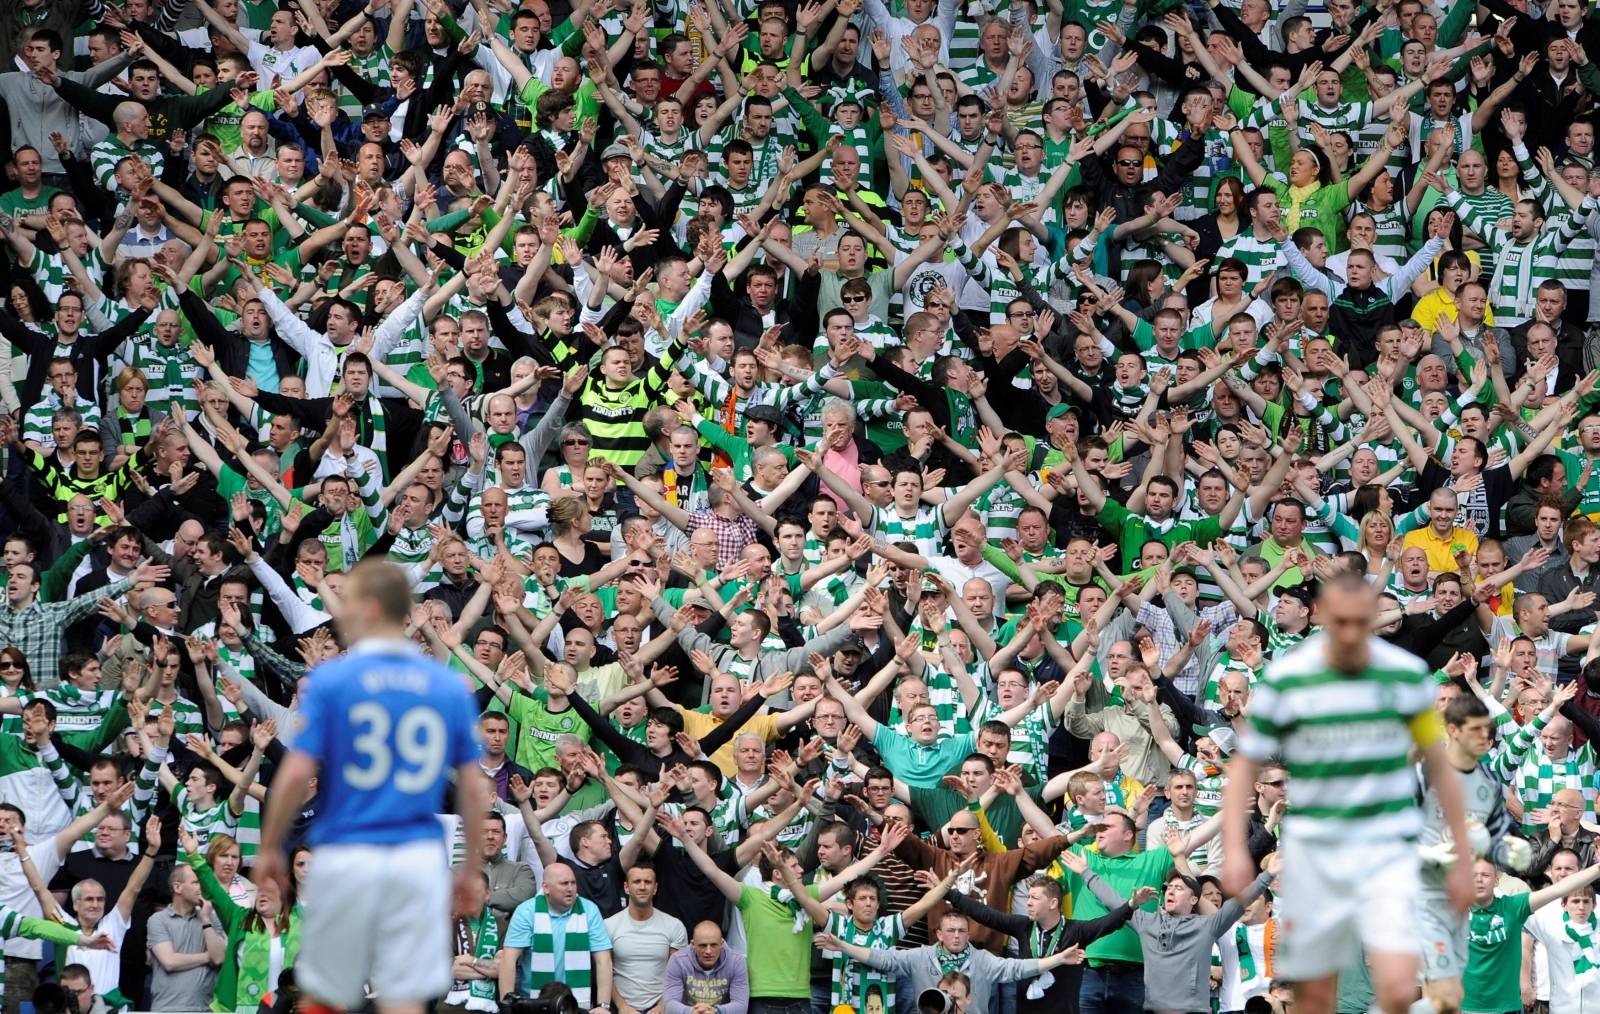 FILE PHOTO: Celtic fans show their support for manager Neil Lennon during their 0-0 draw with Rangers in a Scottish Premier League clash at Ibrox Stadium, Glasgow.